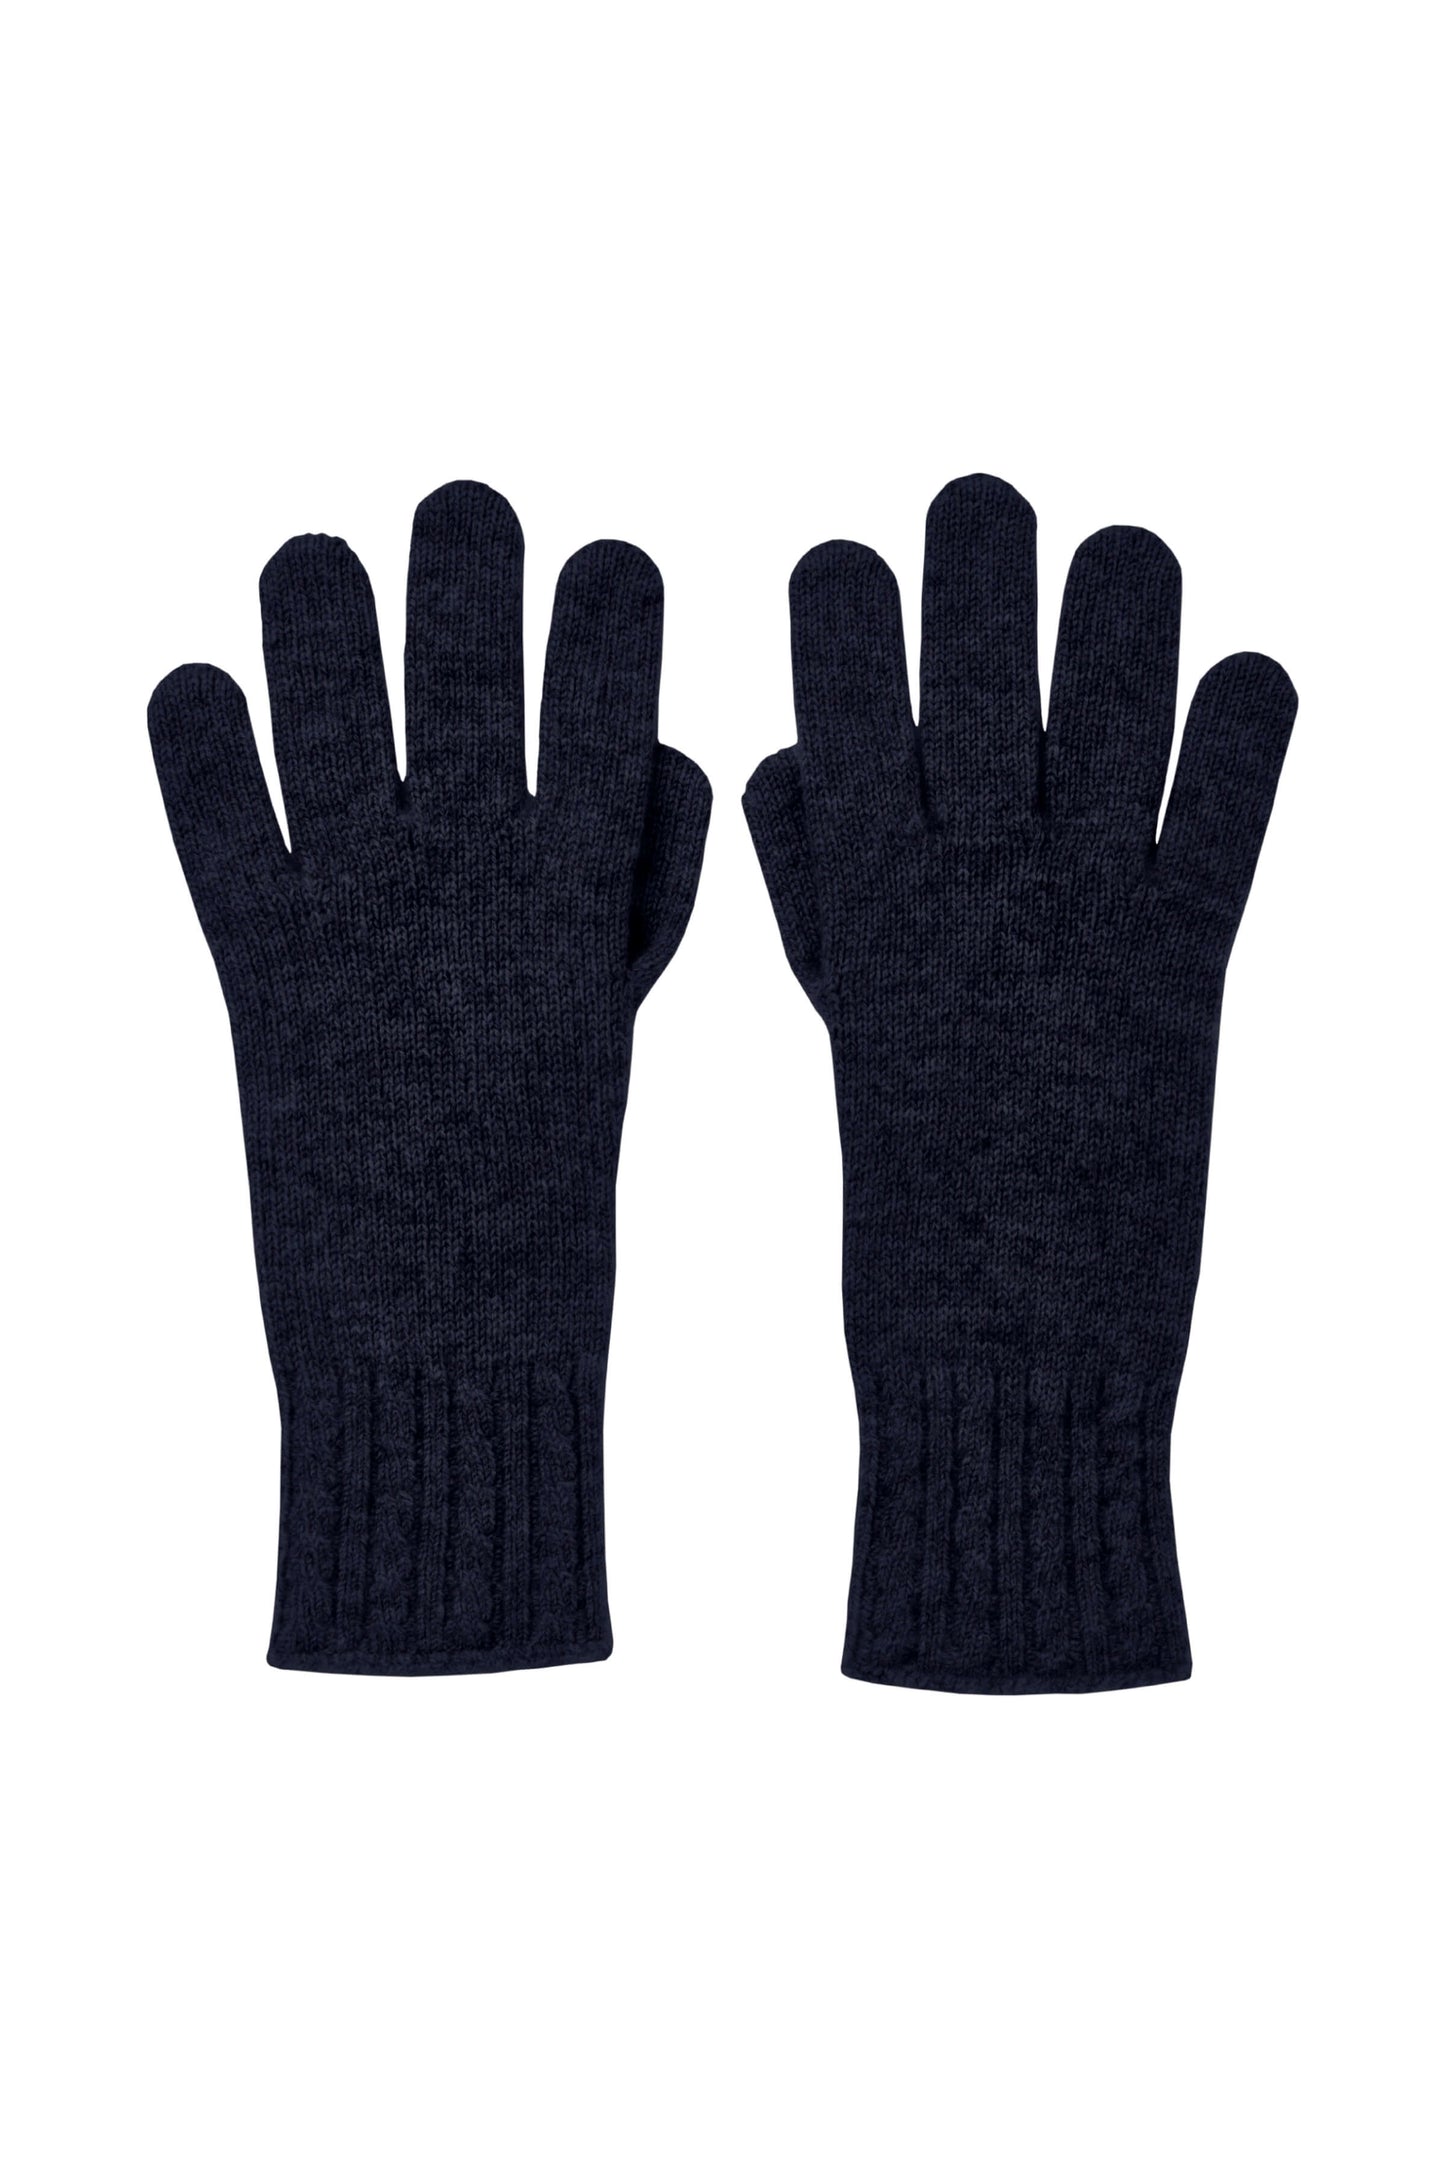 Johnstons of Elgin’s Navy Women's Cashmere Gloves with Cable Cuff on a white background HAE03245SD0707